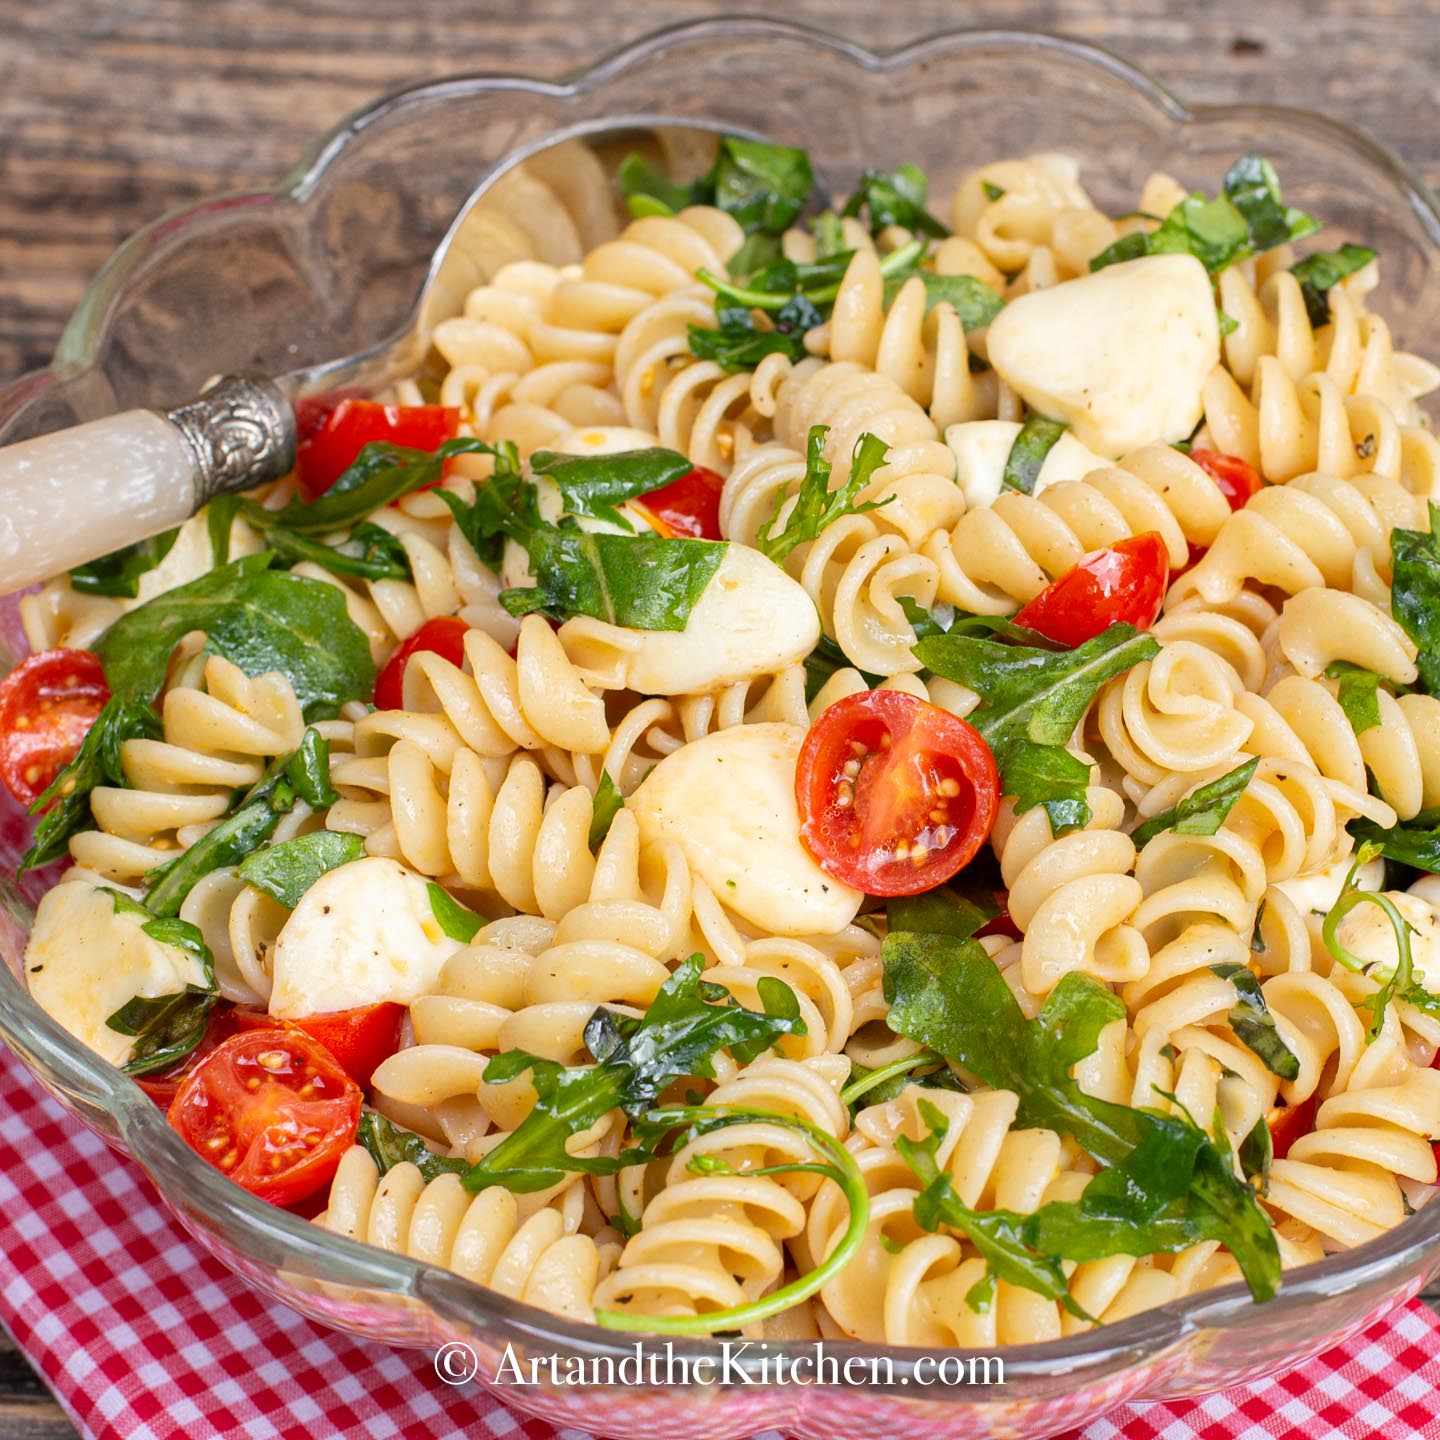 Rotini pasta tossed together with bocconcini, cherry tomatoes, arugula, and fresh basil.